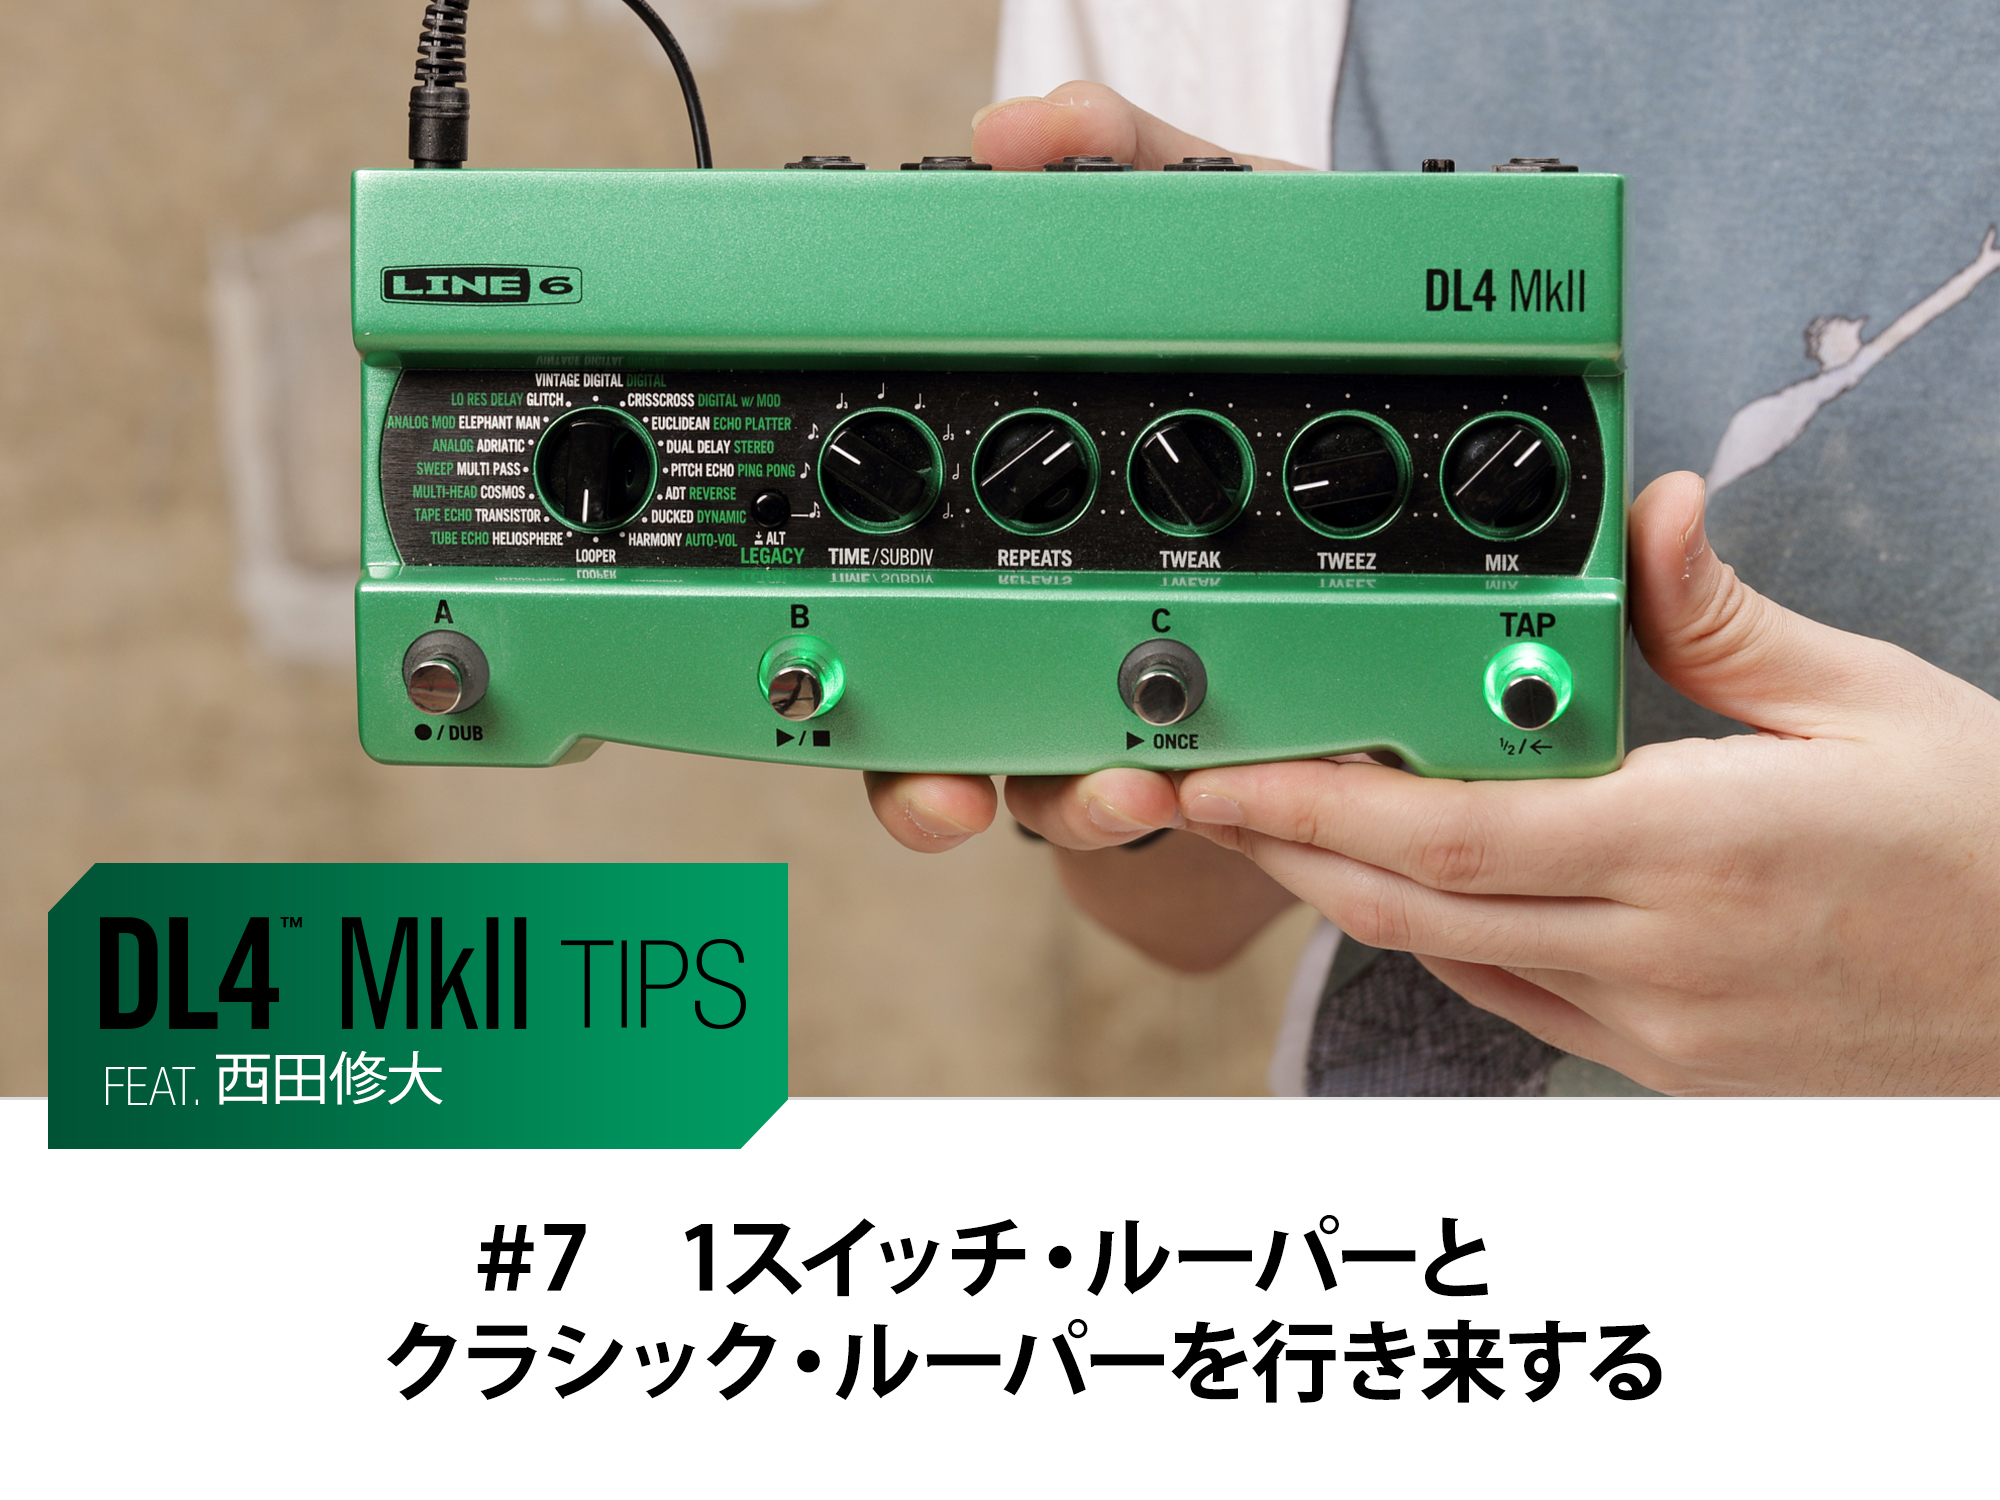 DL4 MkII Tips　第7回　feat.西田修大